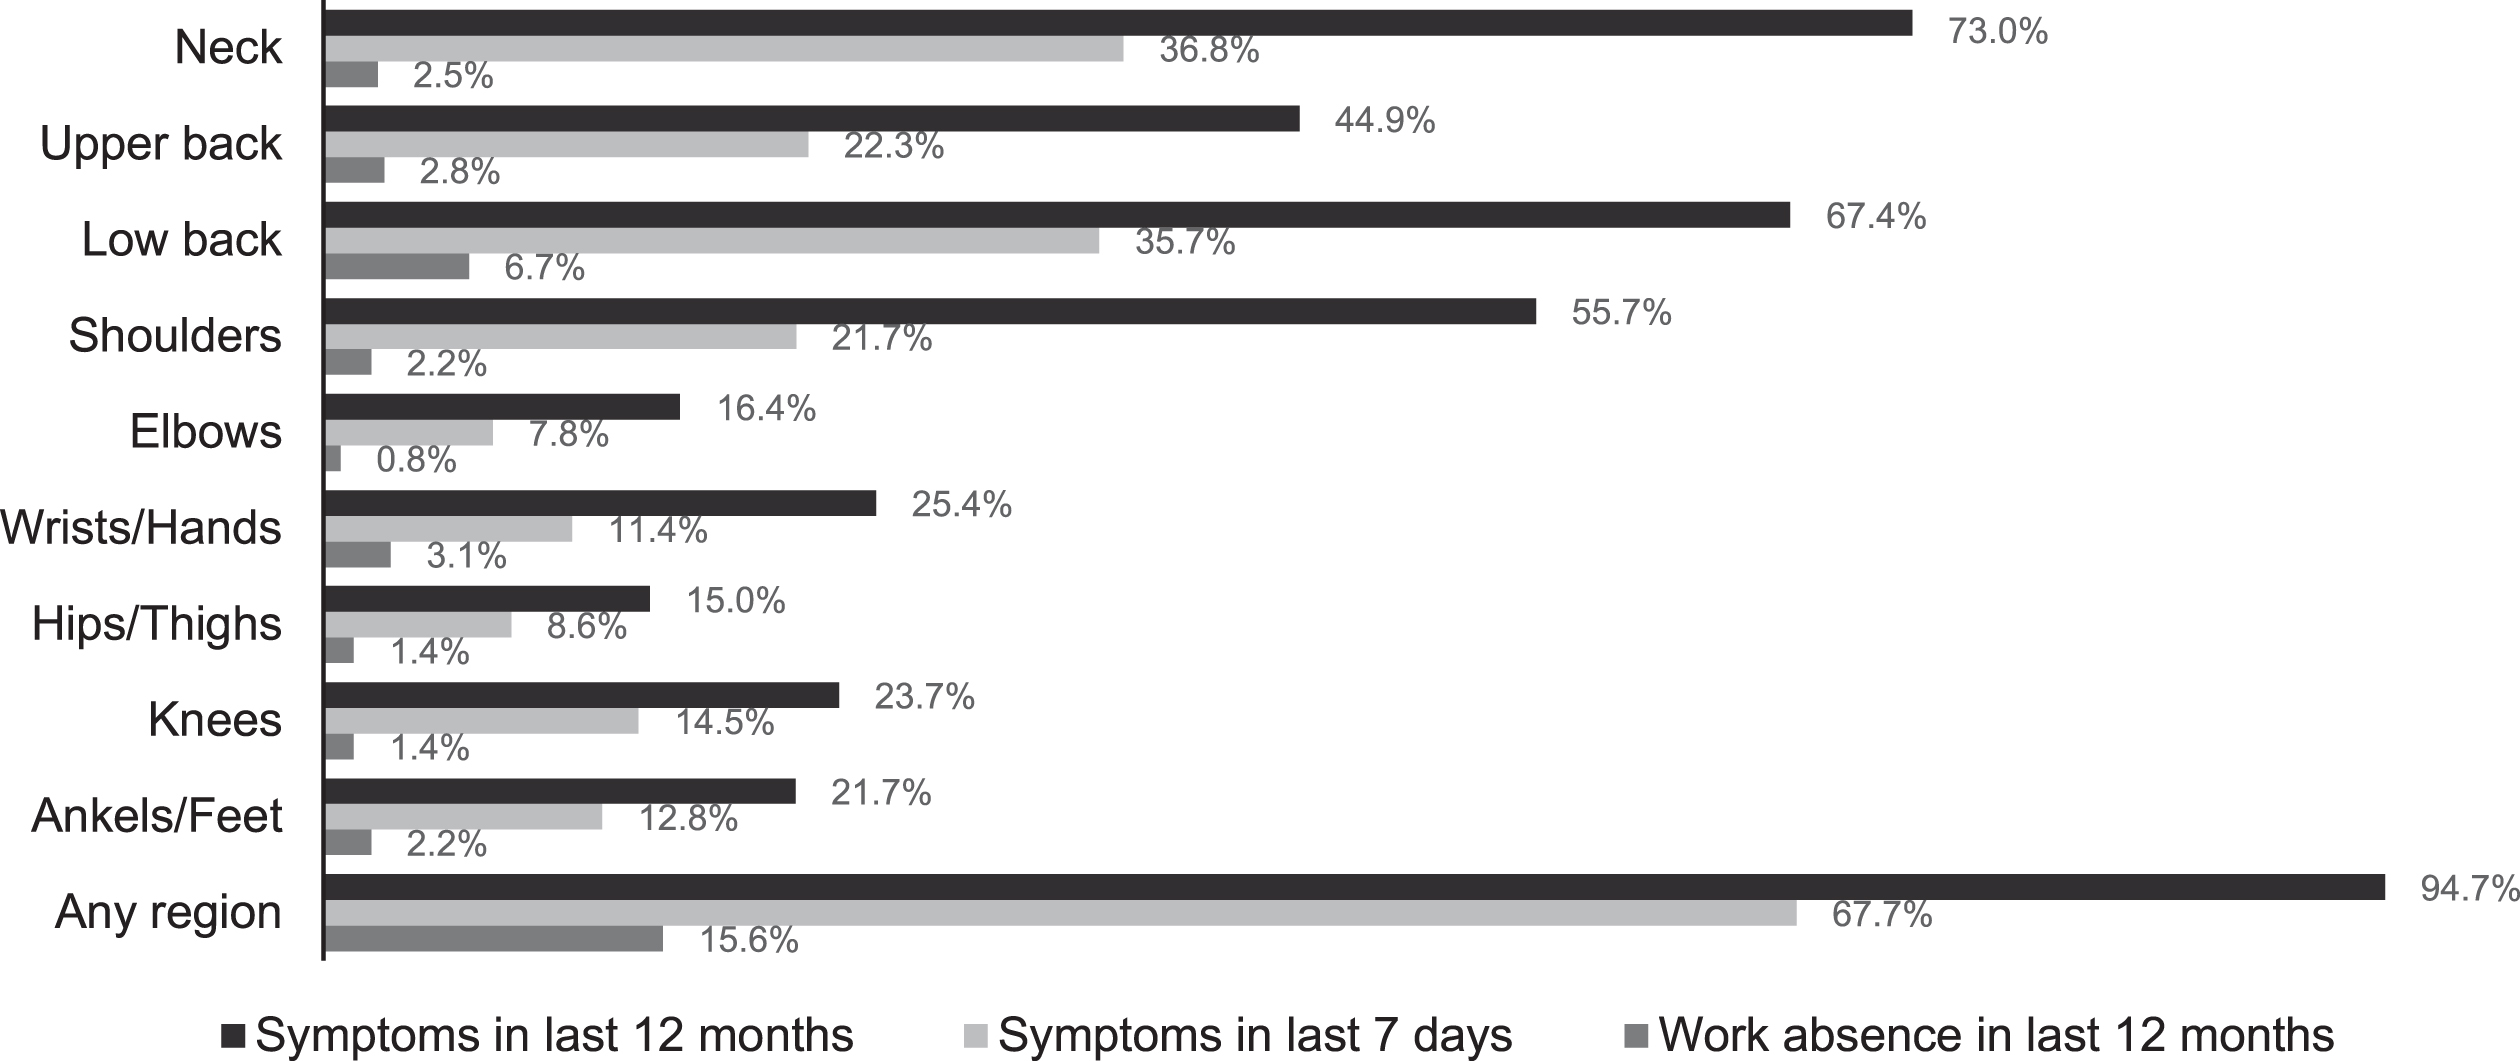 WRMSDs symptoms prevalence in radiographers during the last 12 months, last 7 days and work absence in last 12 months.